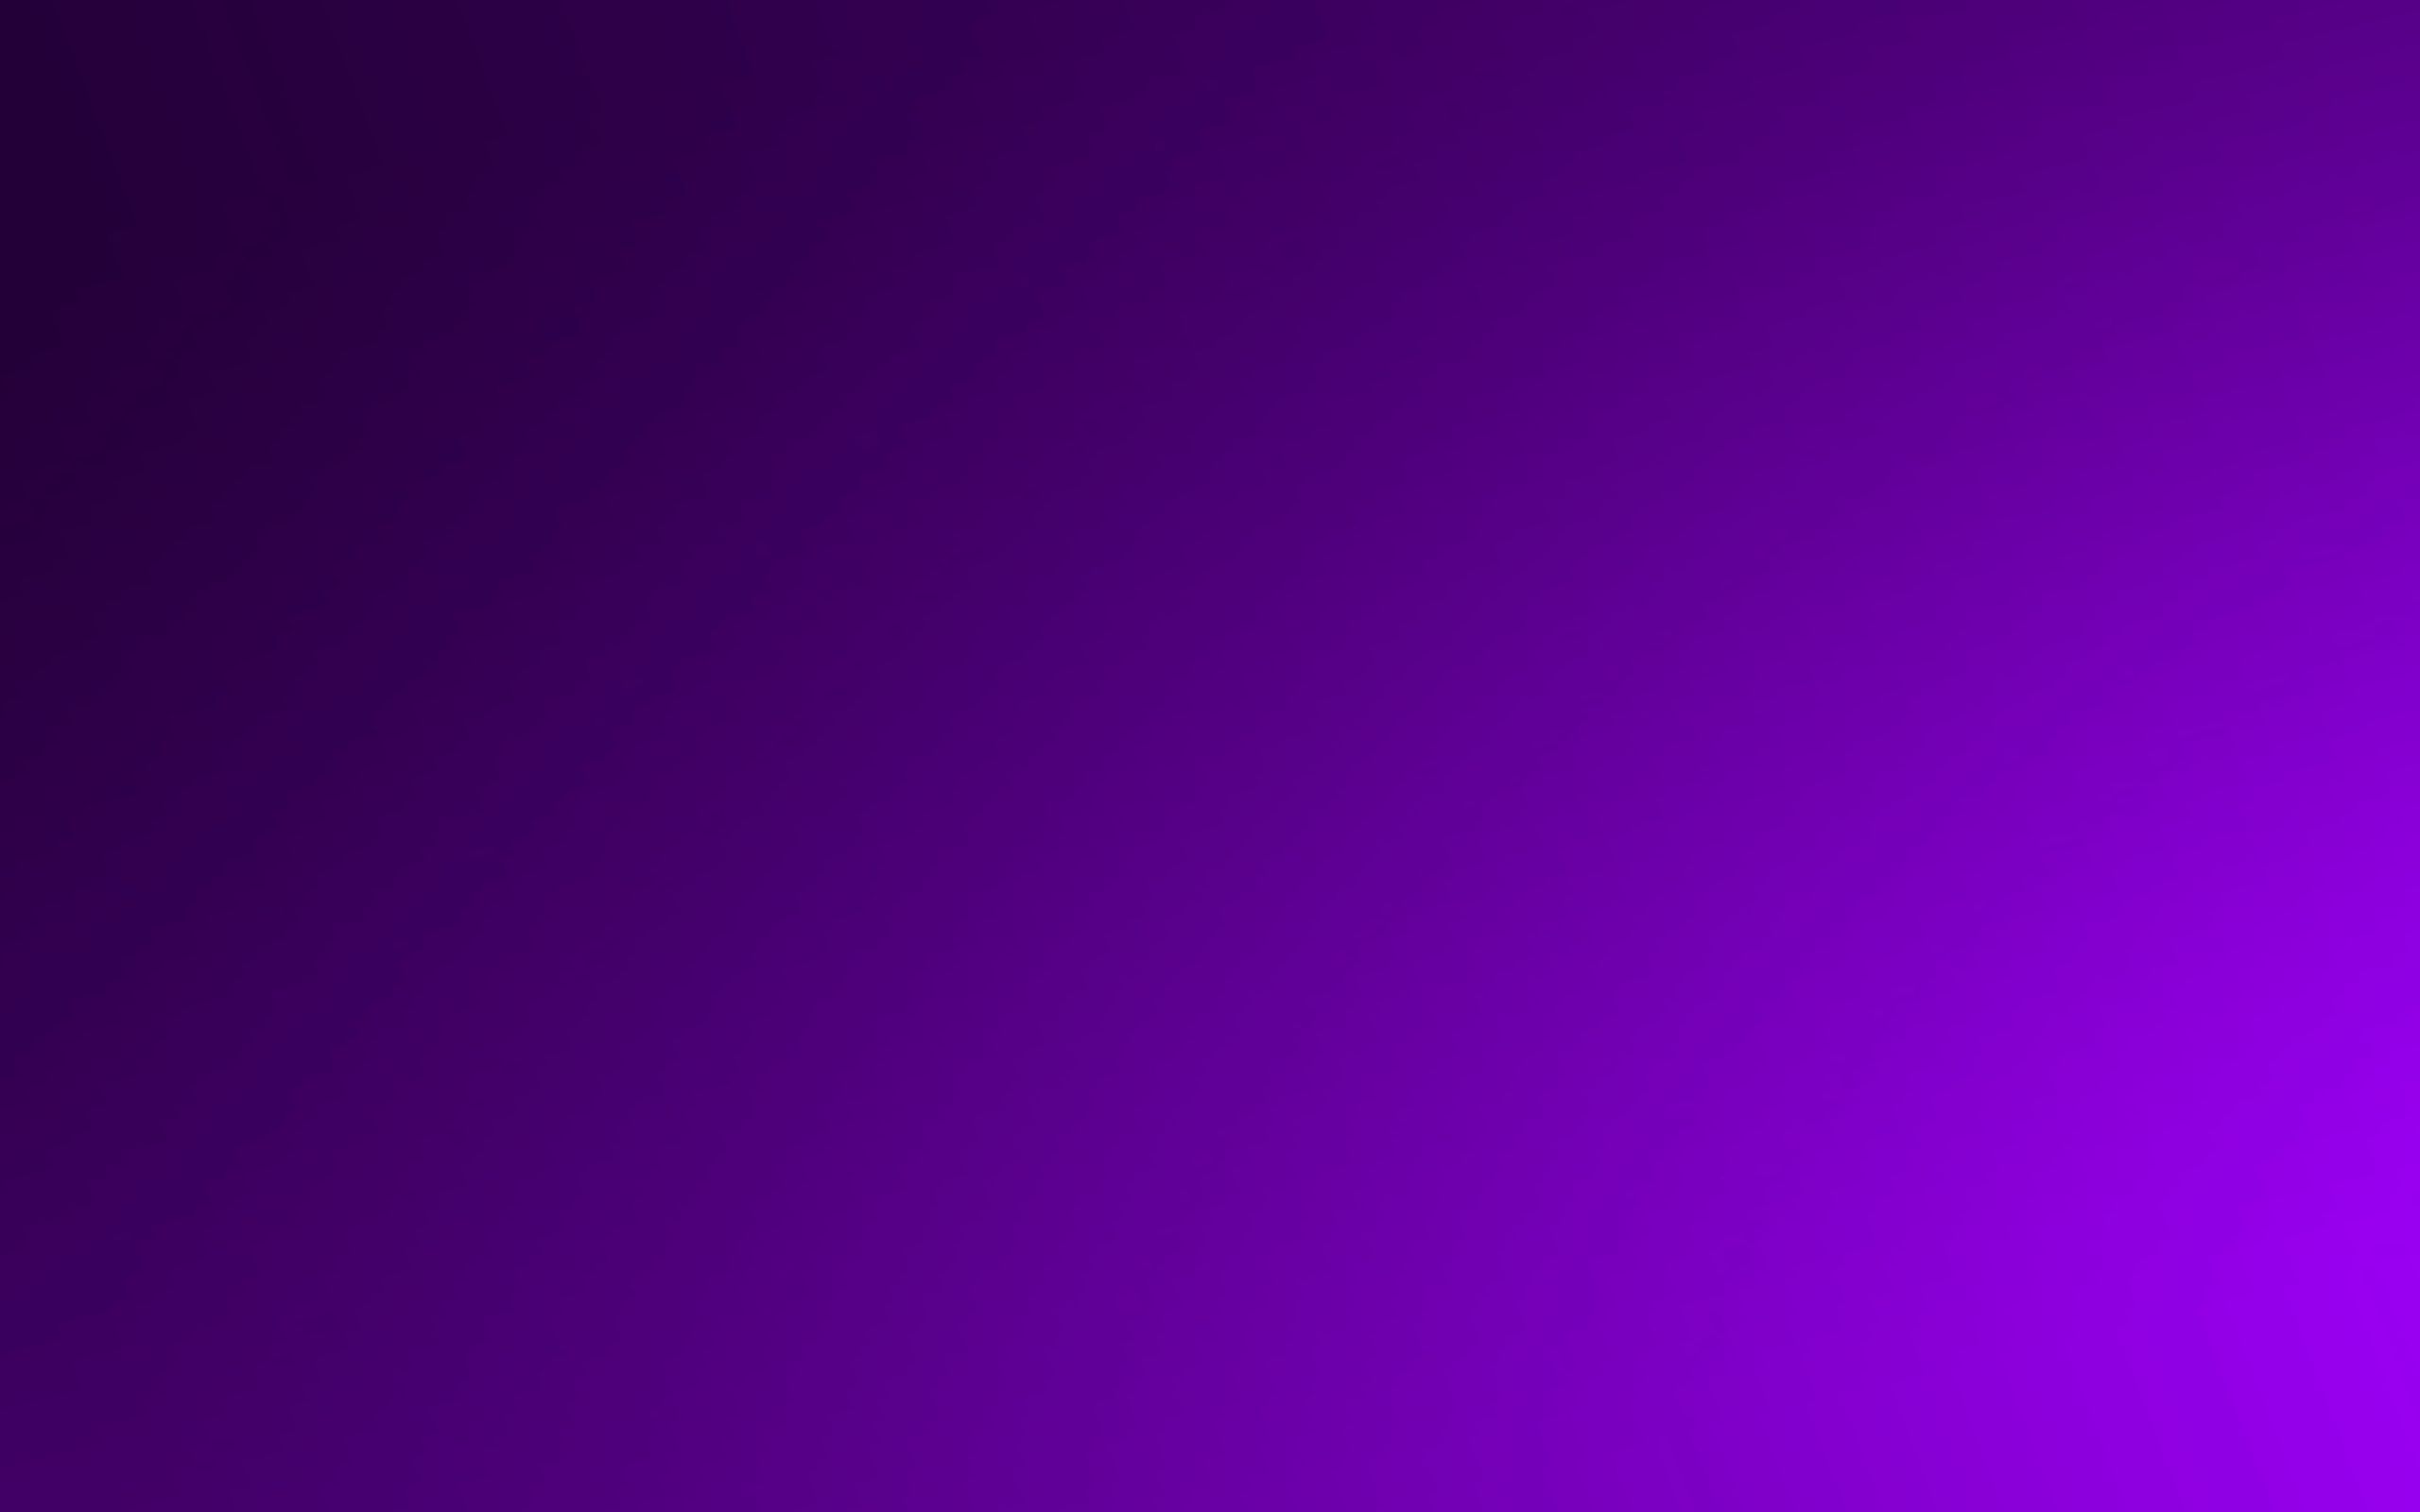 solid, violet, purple, background, abstract cell phone wallpapers